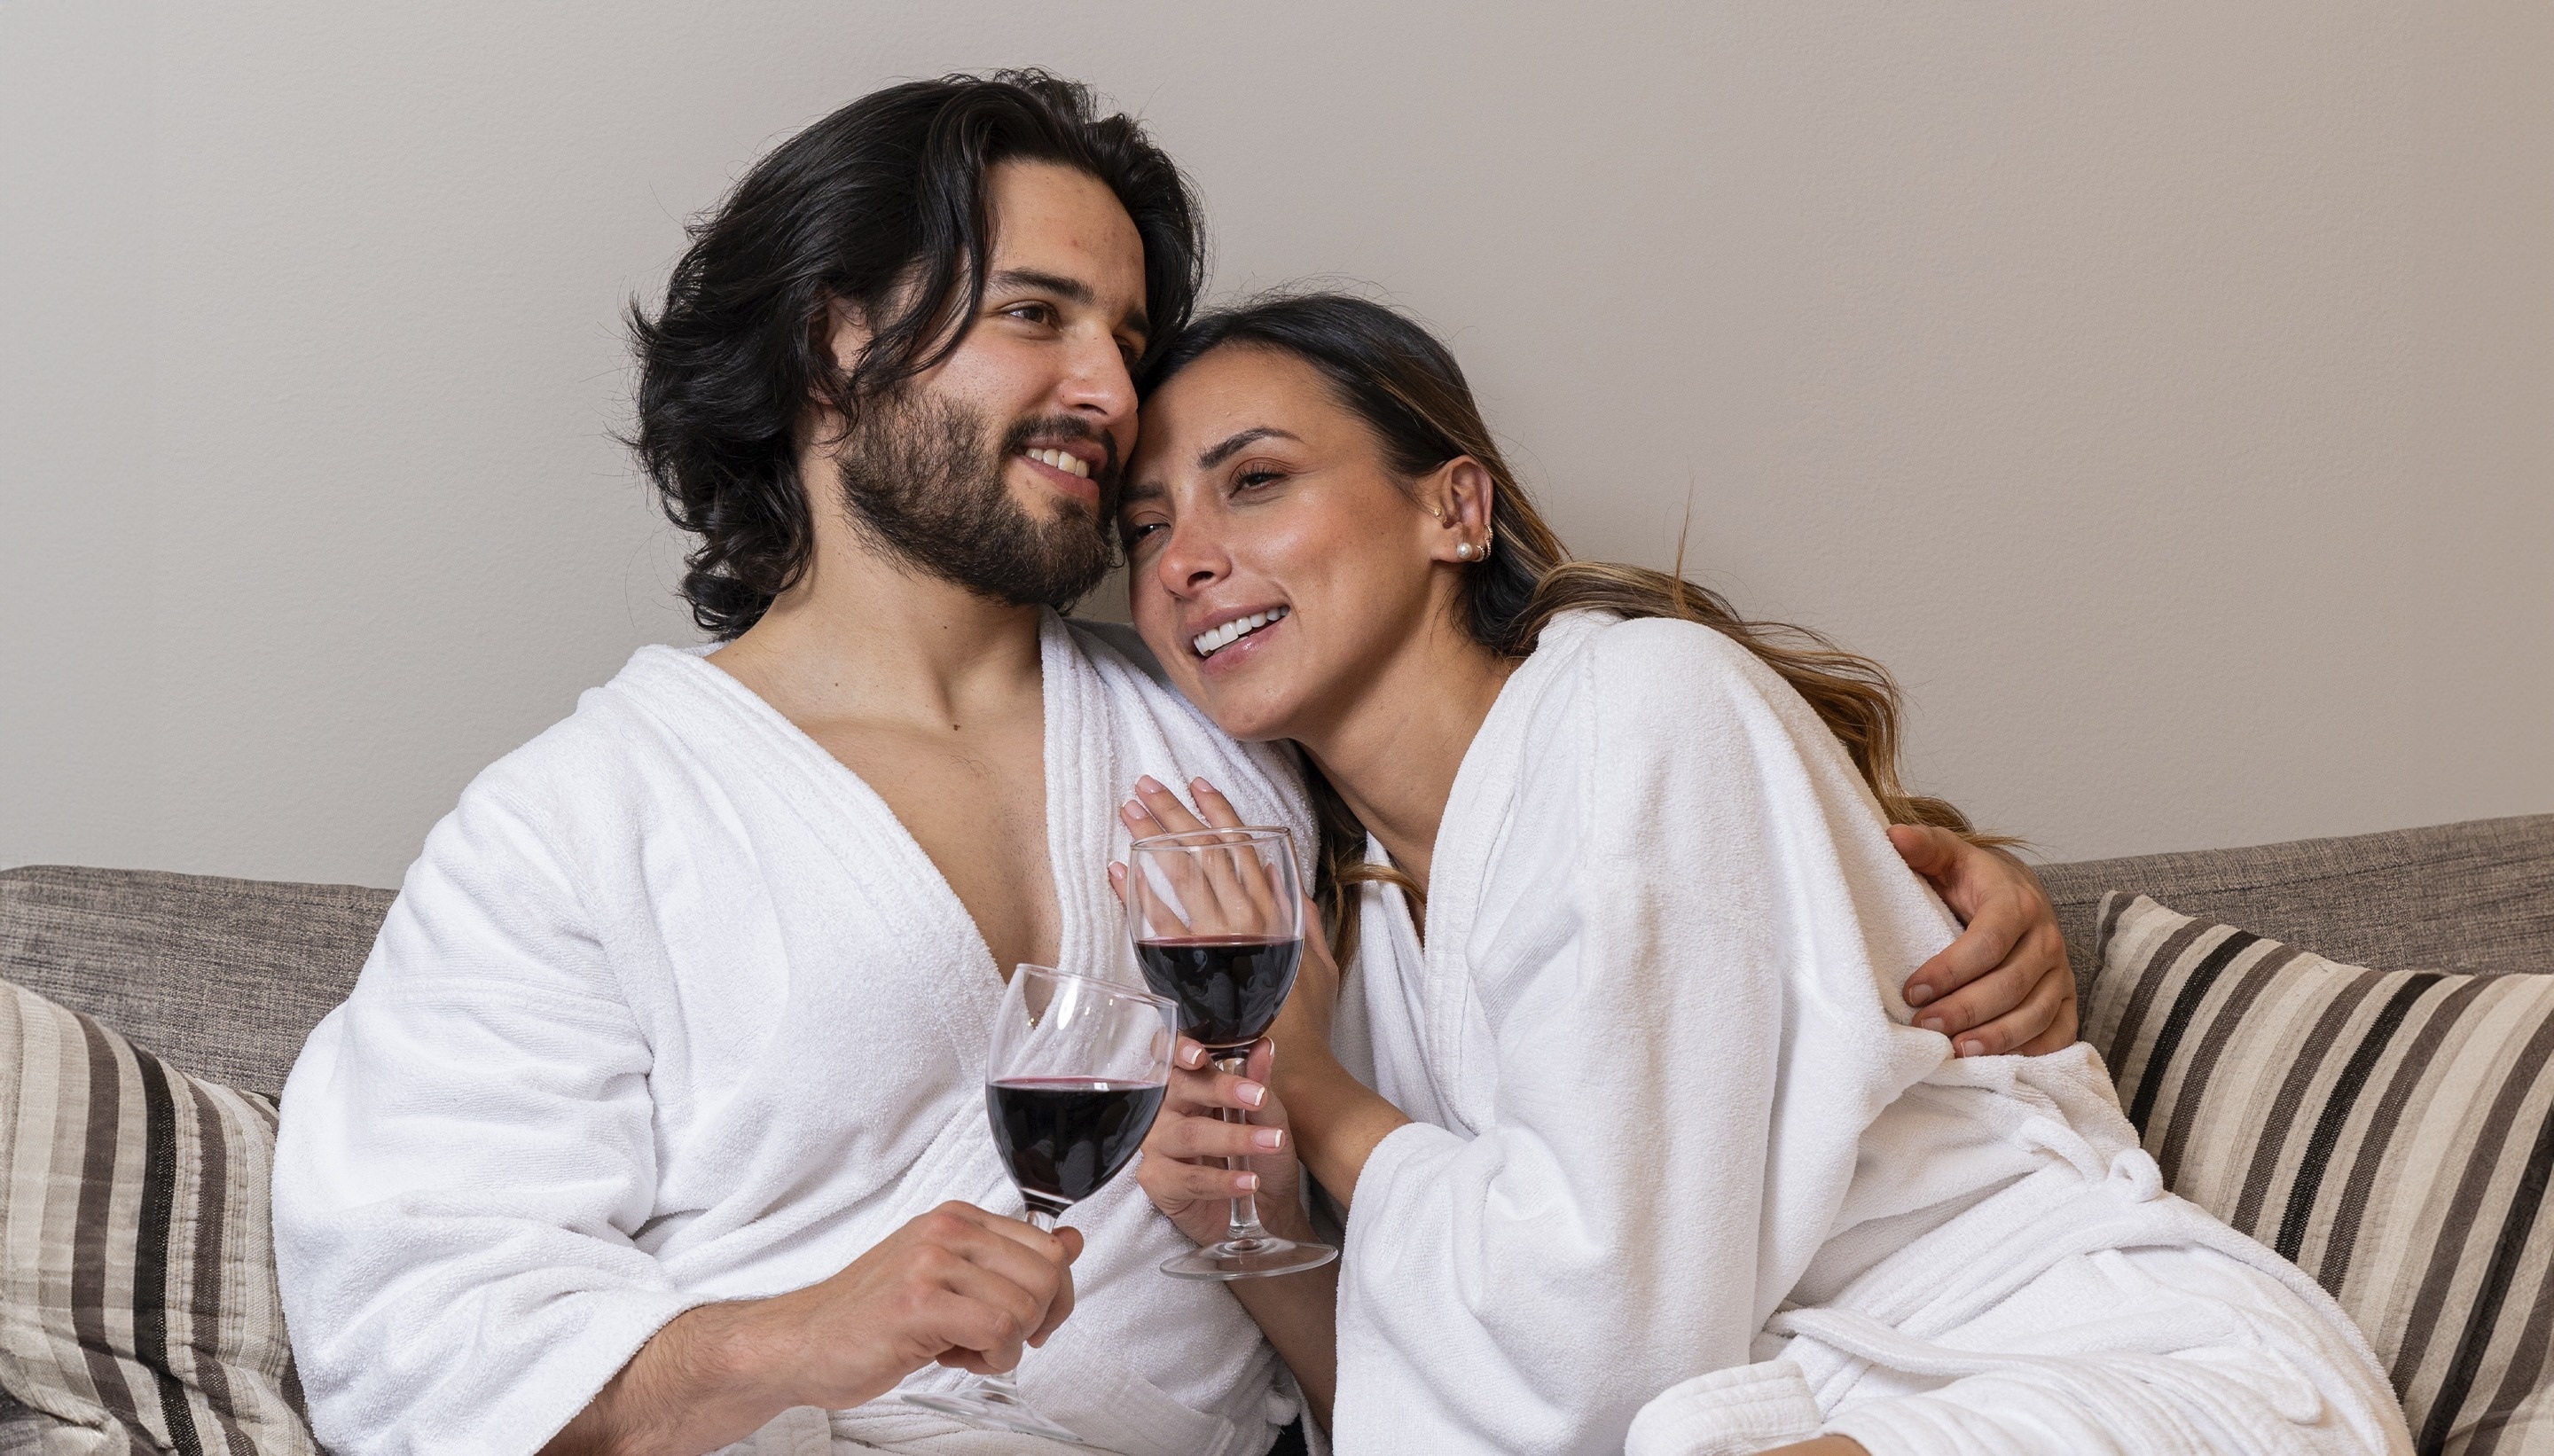 a man and a woman sitting on a couch holding wine glasses